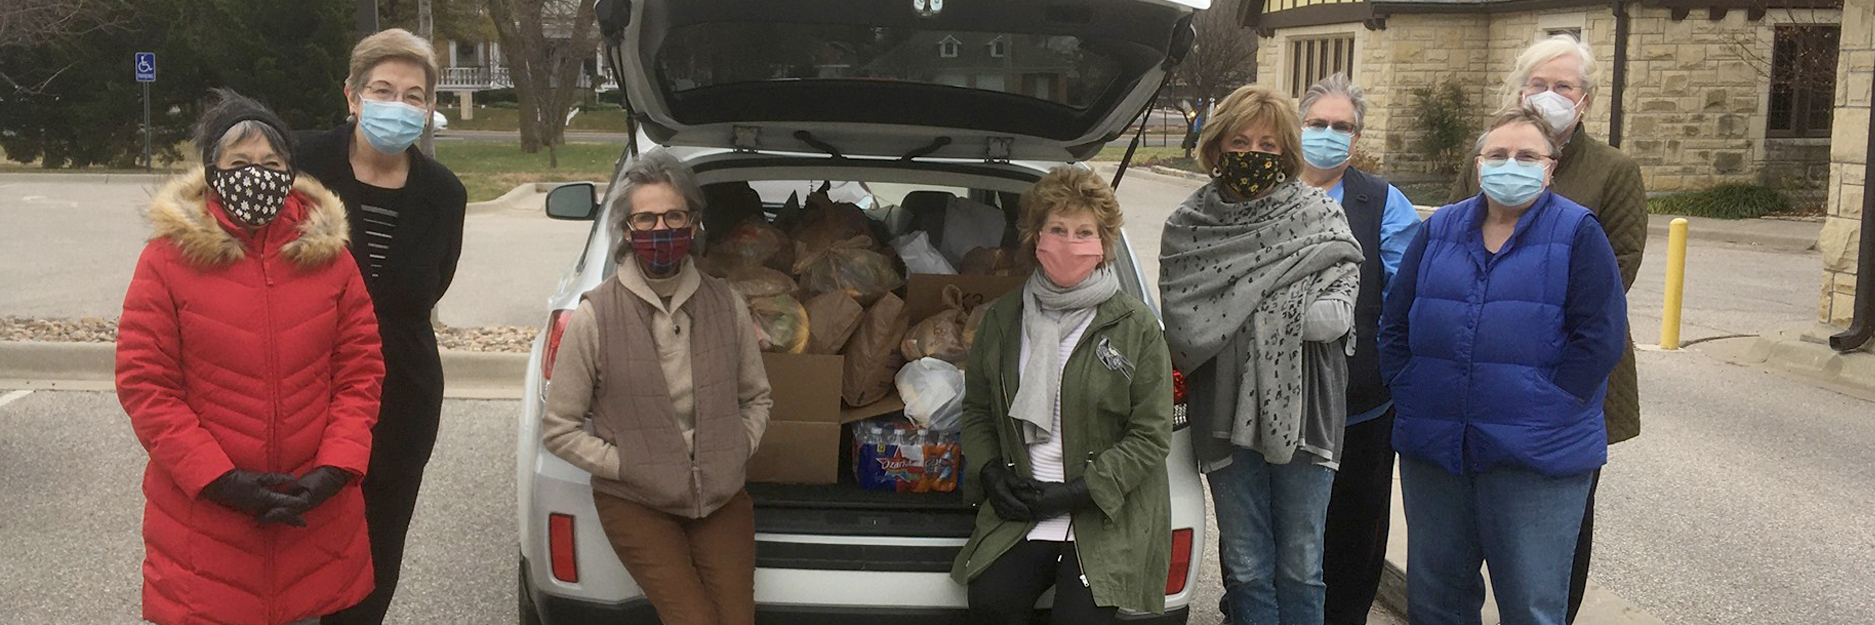 Donors with sacks of food